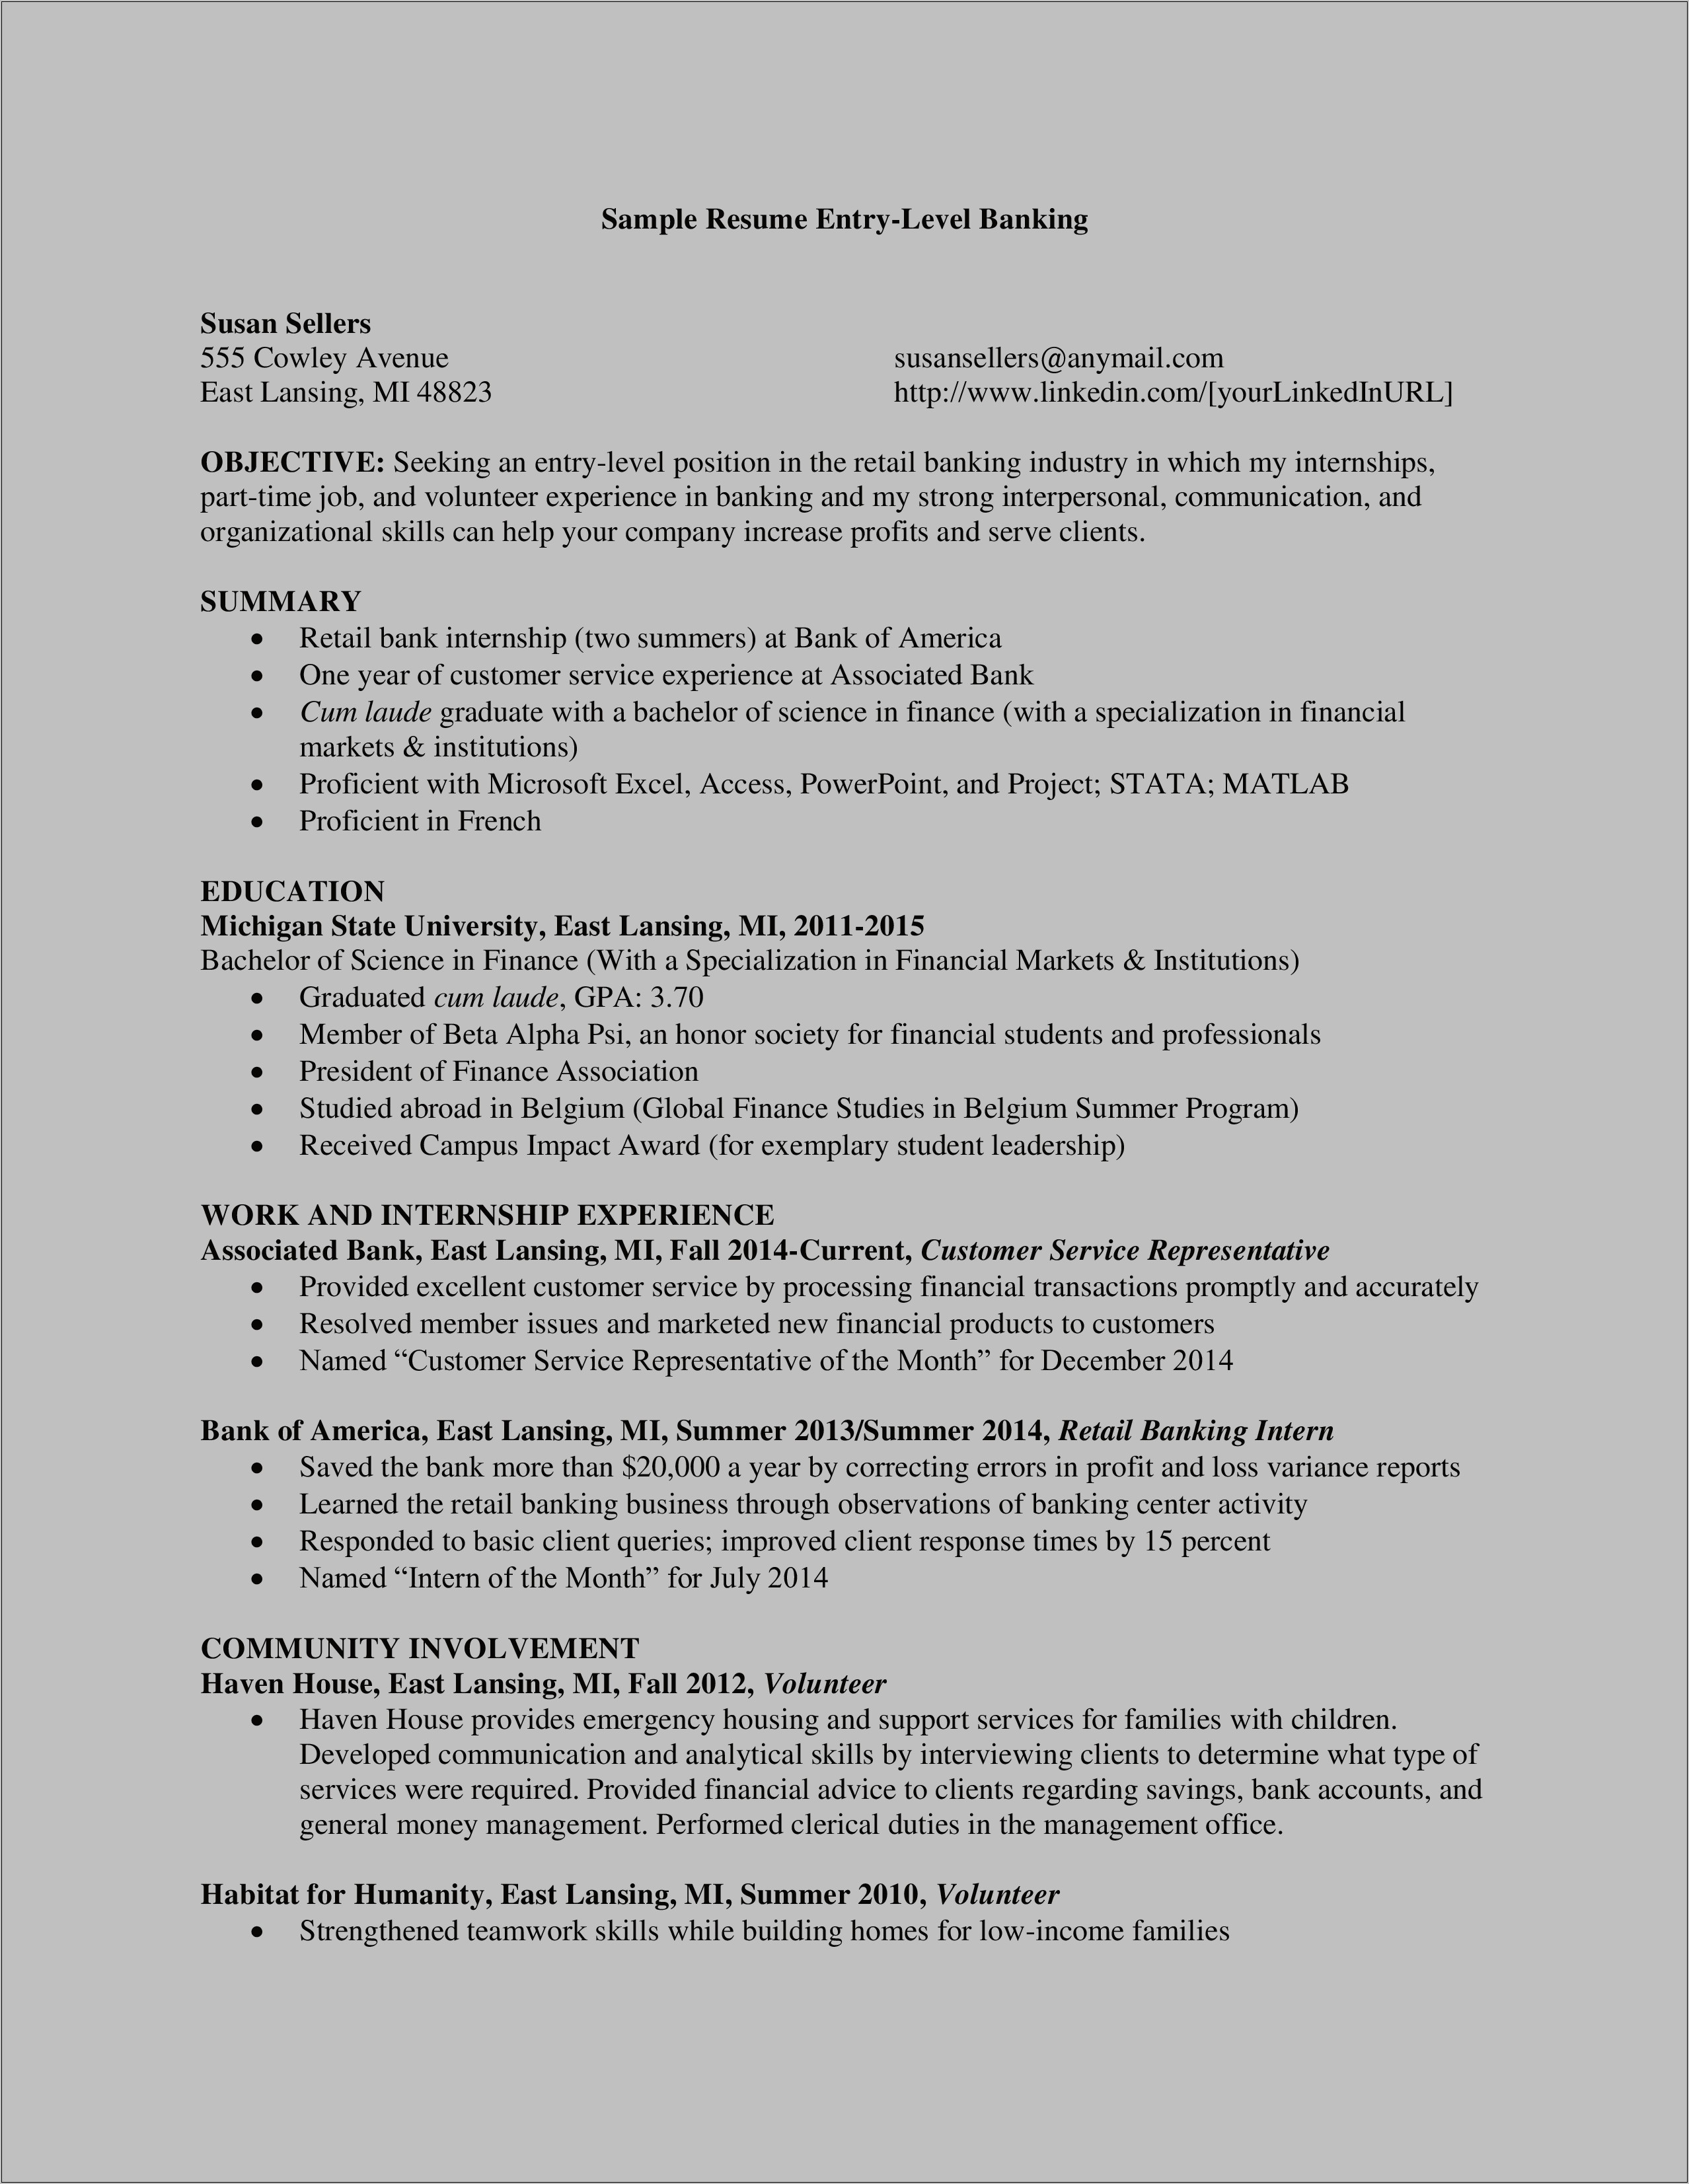 Resume Examples Presidnet Of Associton